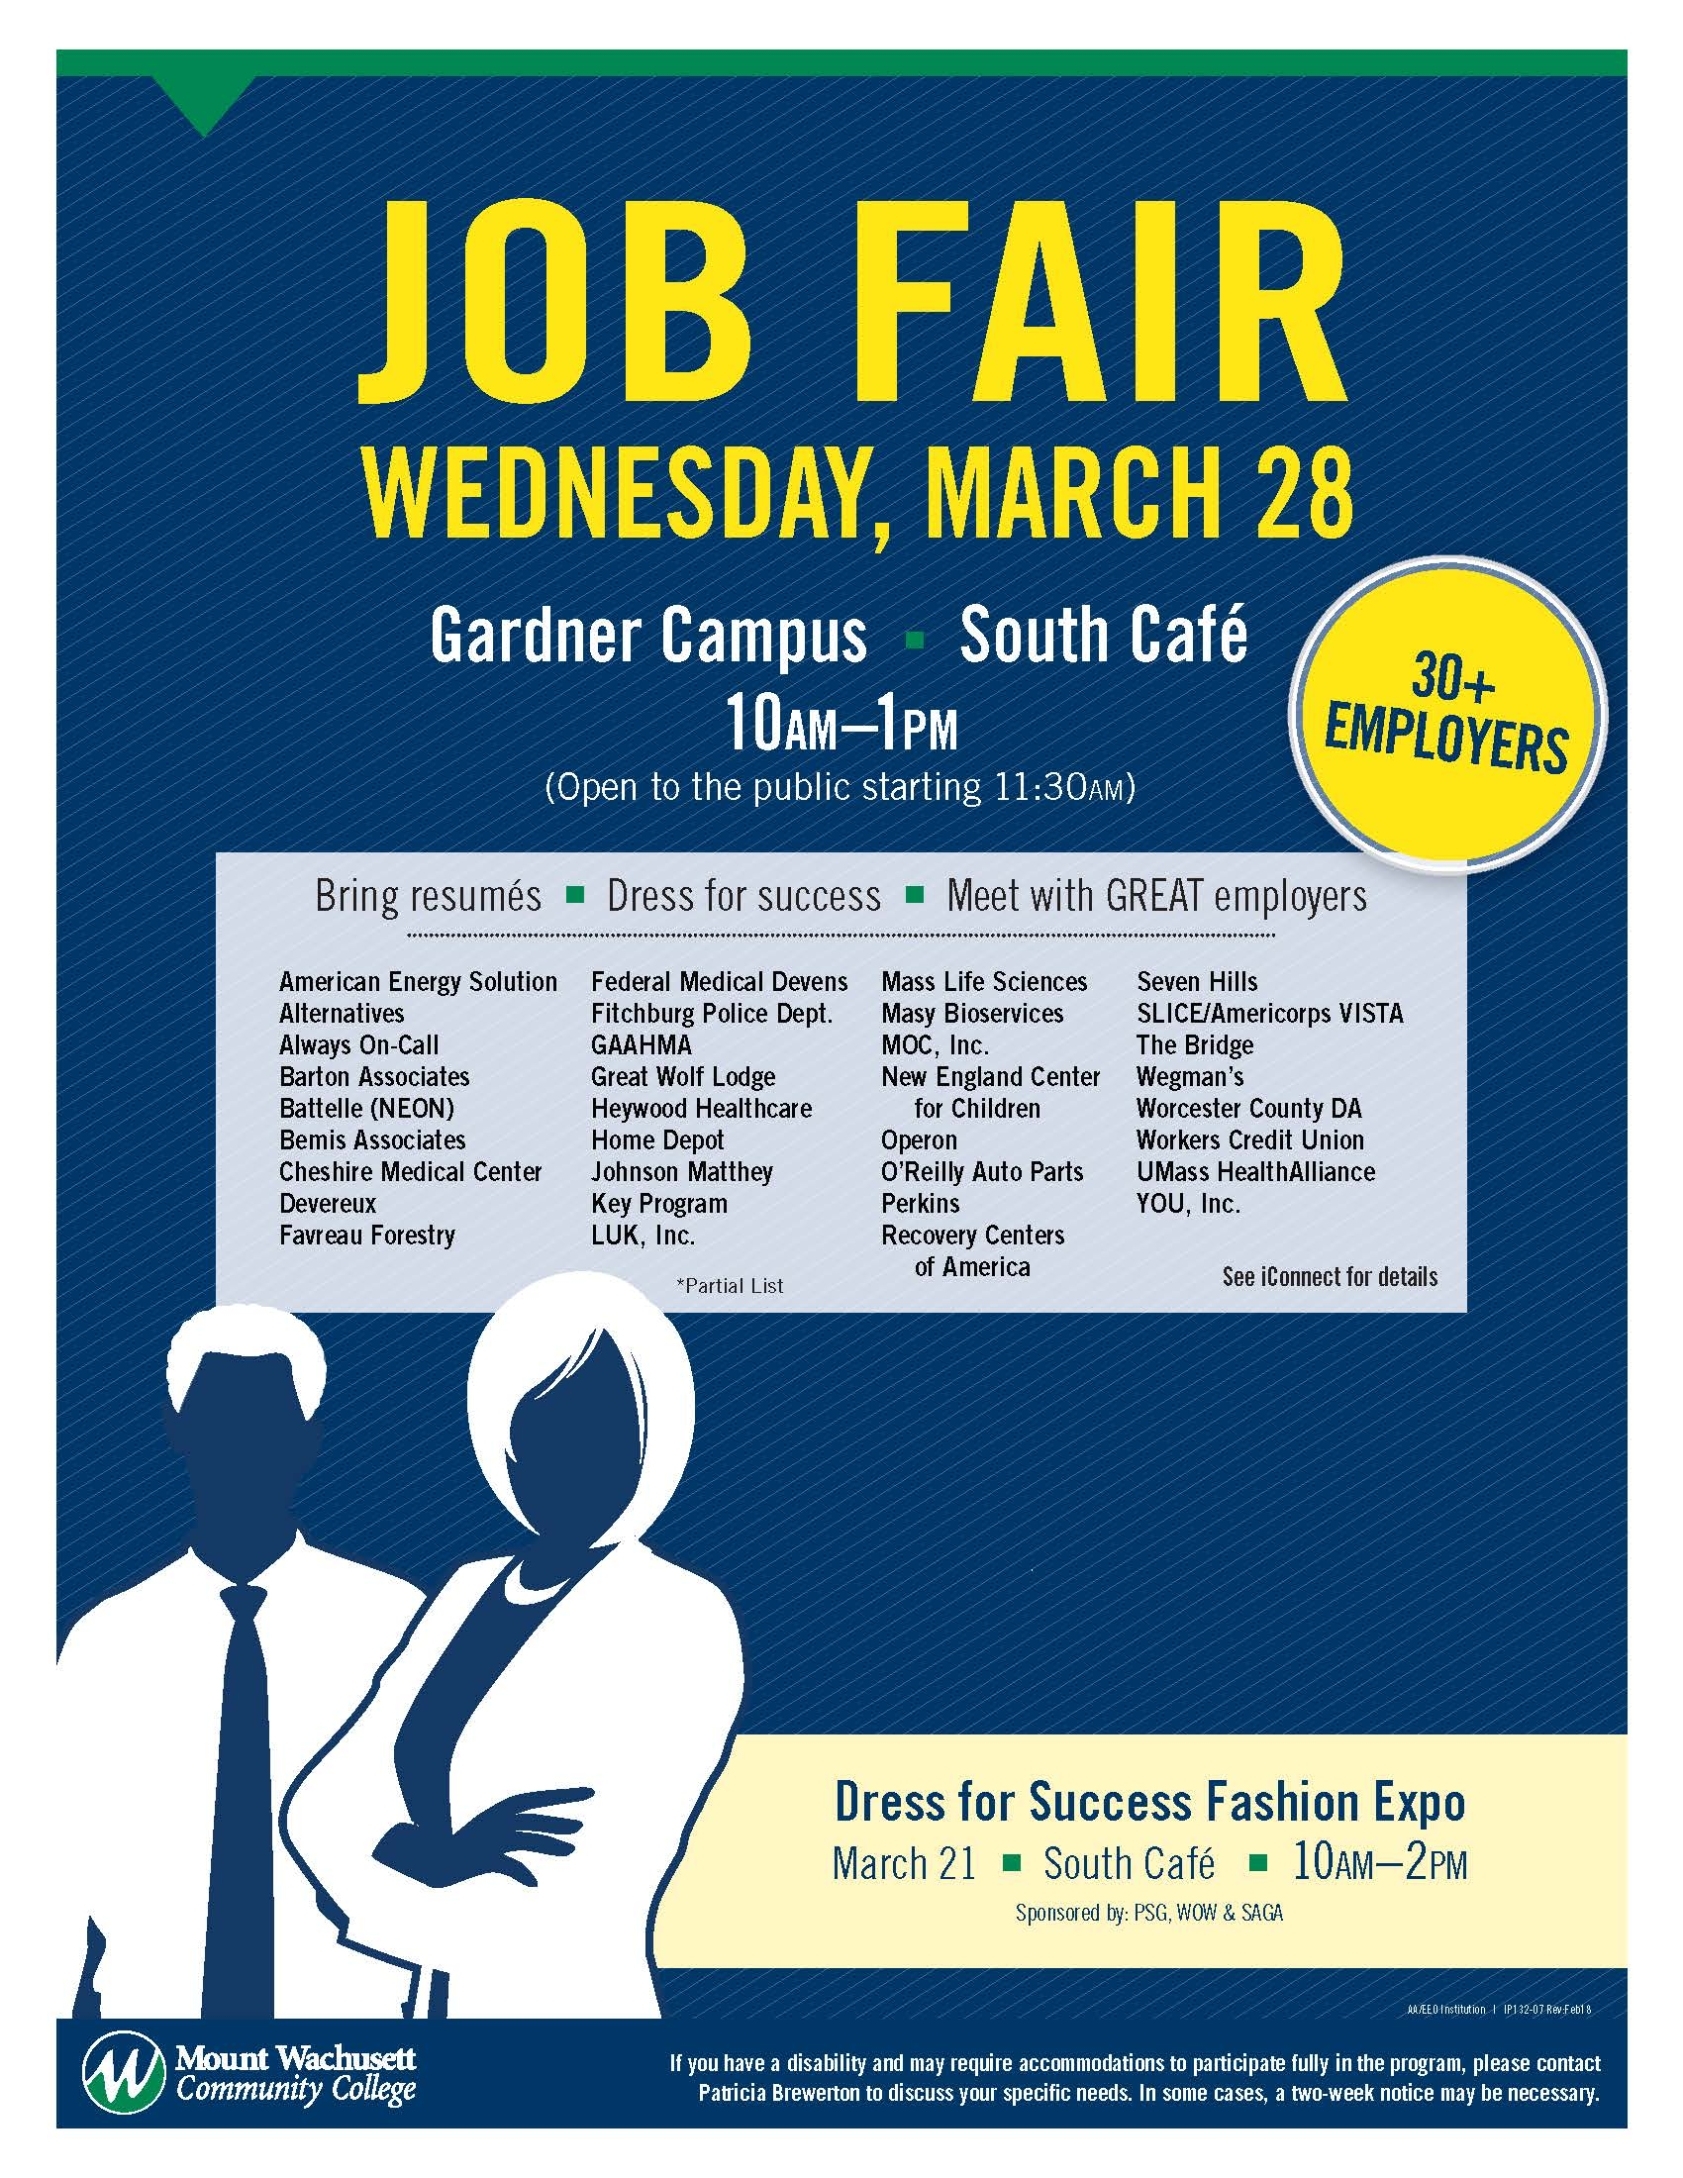 Job Fair To Bring Over 30 Employers To Mwcc — Mount Wachusett Community College throughout Job Fair Flyer Template Free